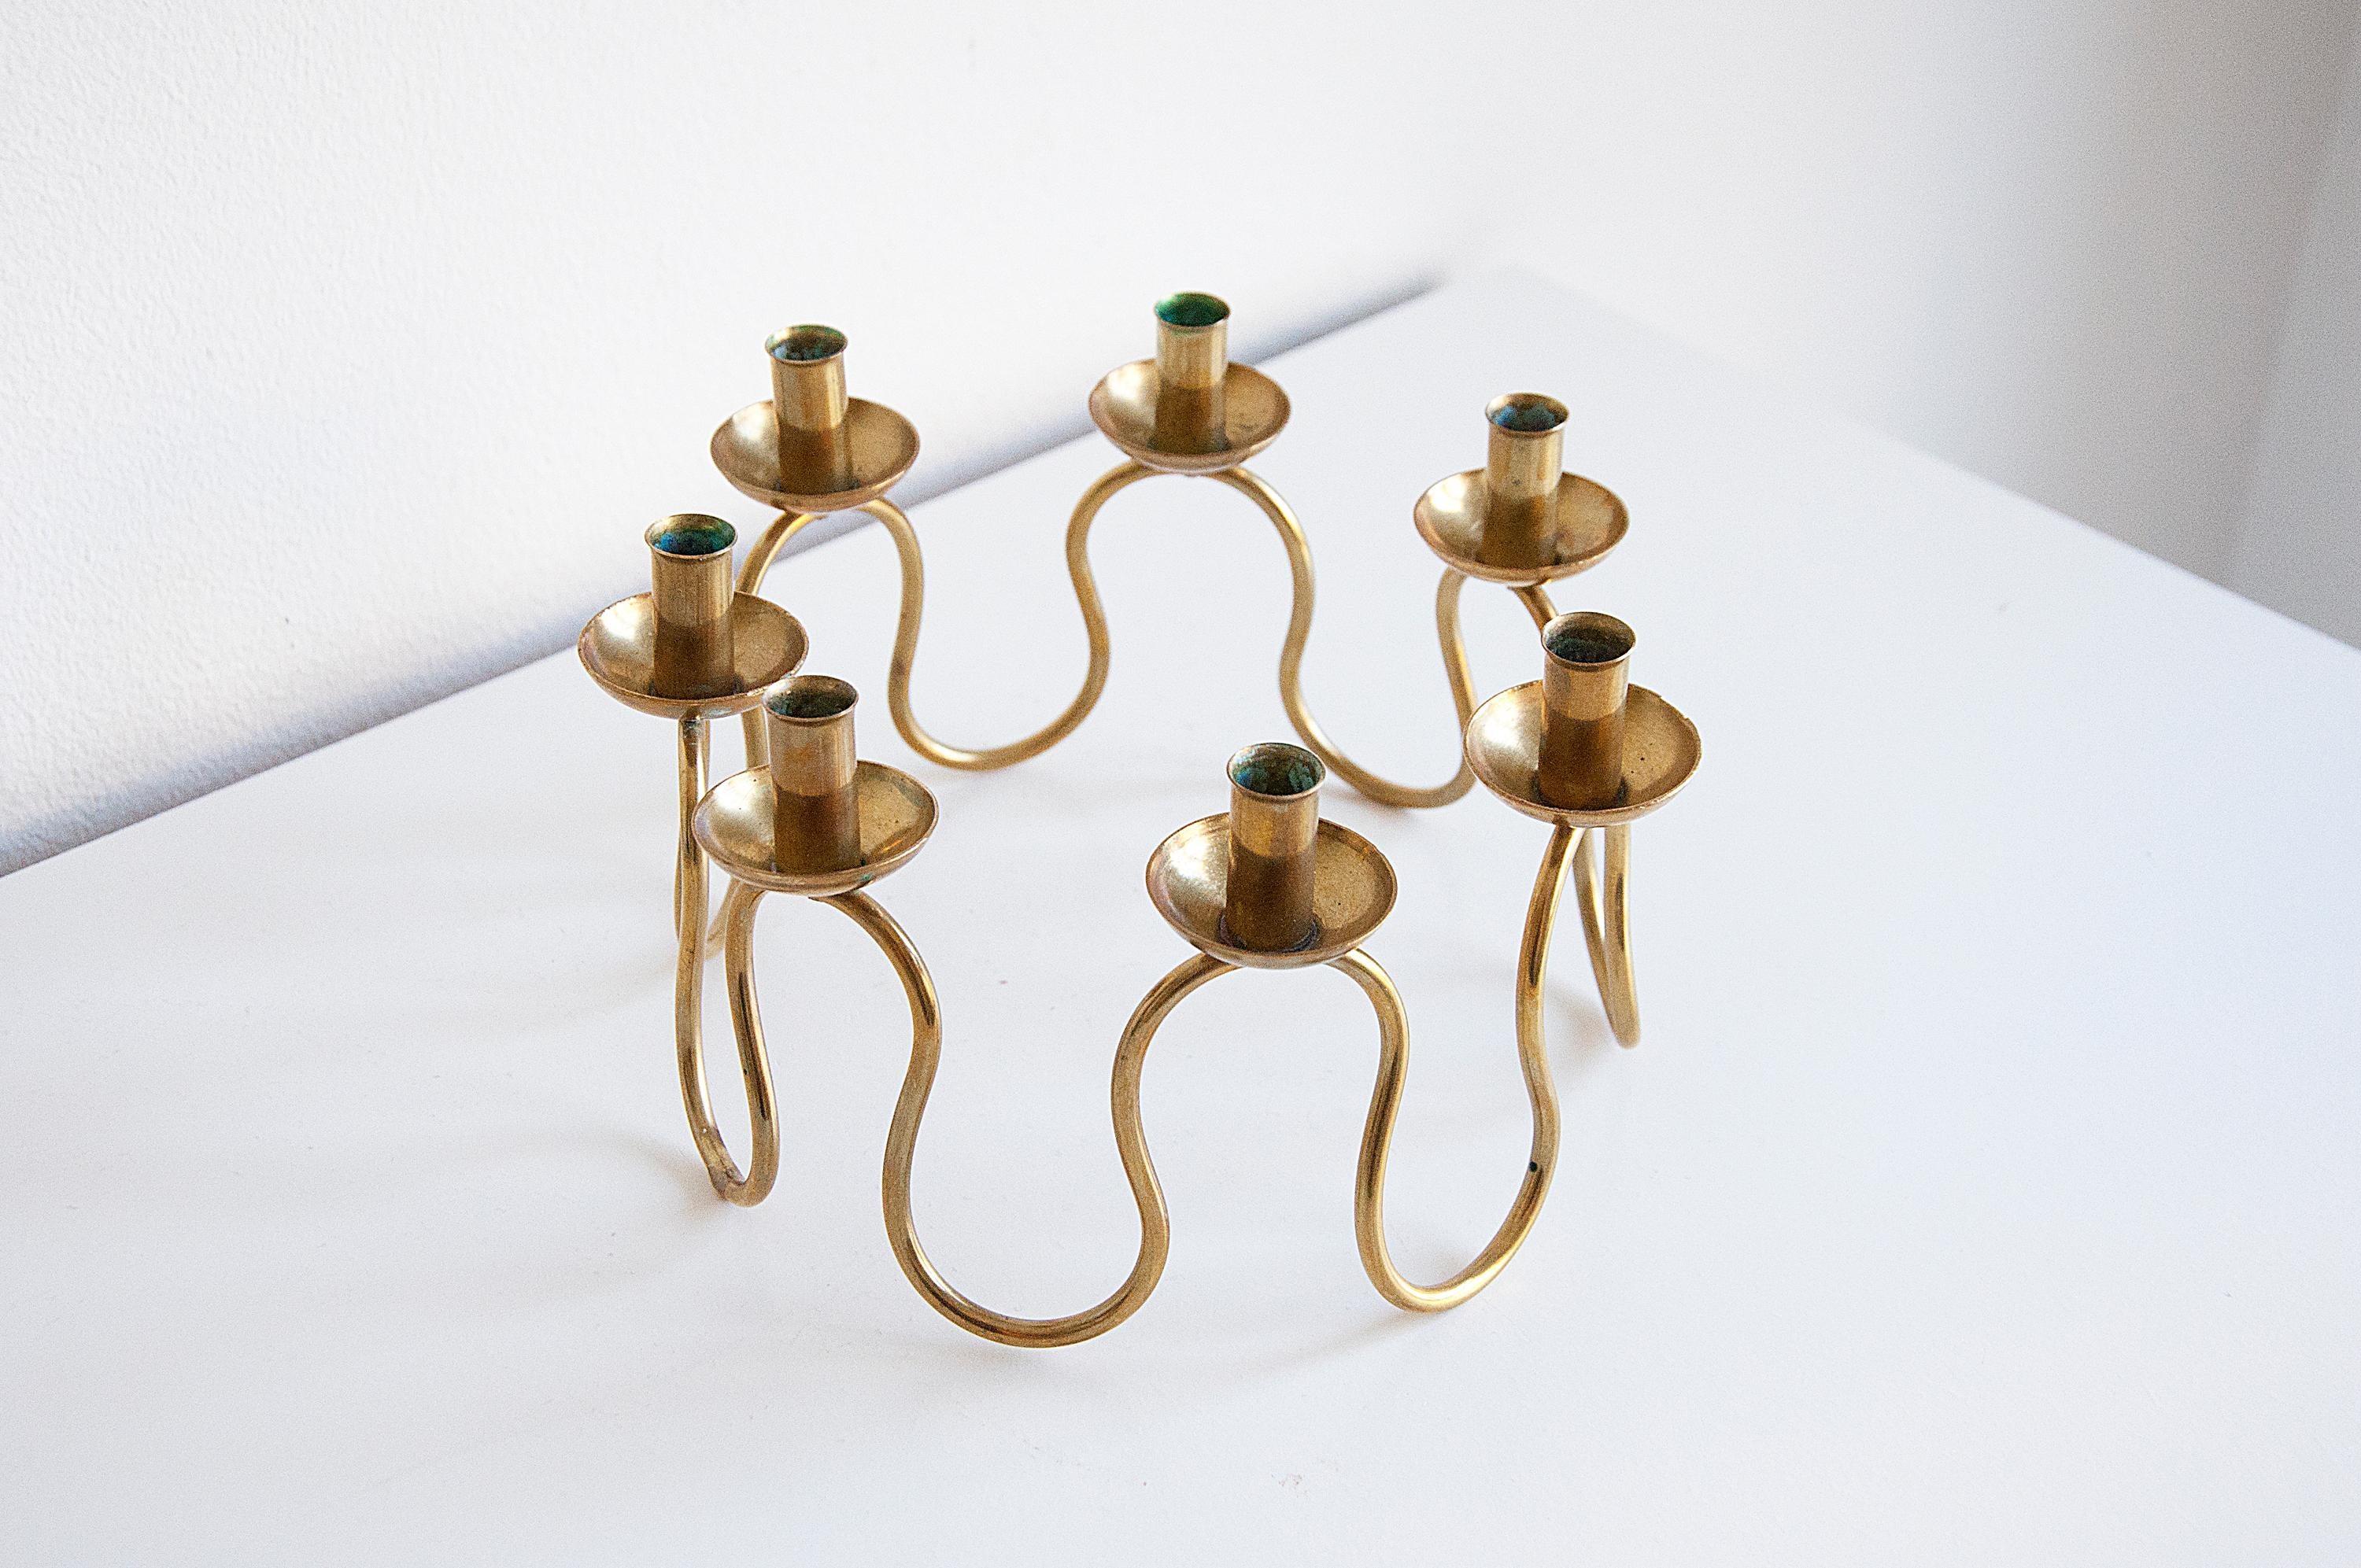 Mid-20th Century Swedish Modern Candle Holder in Brass by Lars Holmström, 1950s For Sale